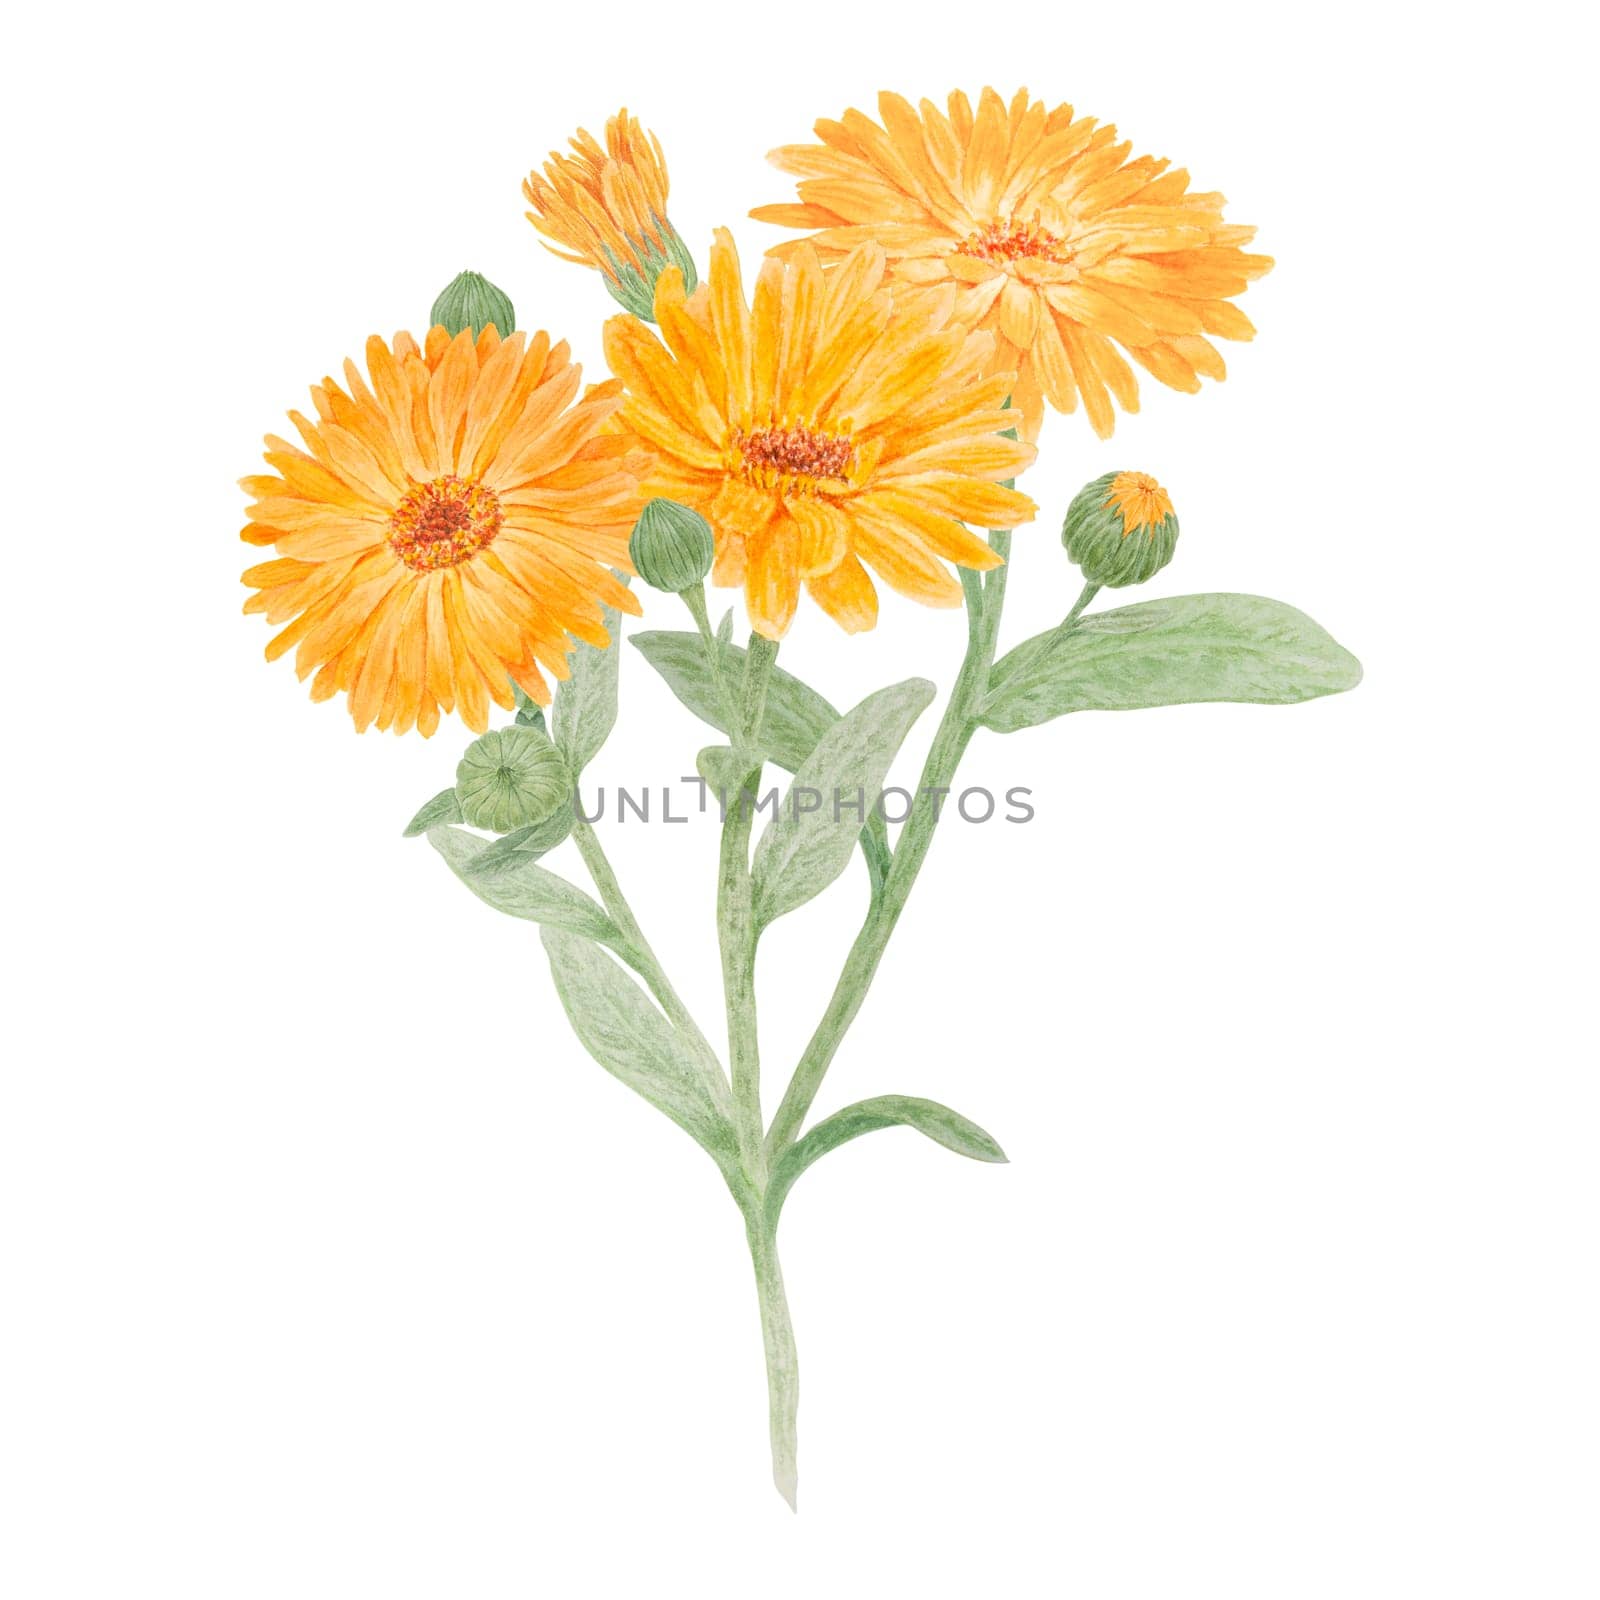 Composition of orange calendula officinalis watercolor hand drawn illustration. Sunny ruddles flower with yellow petals and green leaves for natural herbal medicine, healthy tea, cosmetics and homeopatic remedies. Marigold botanical clipart good as an element for packaging design, labels, eco goods, textile, invitations